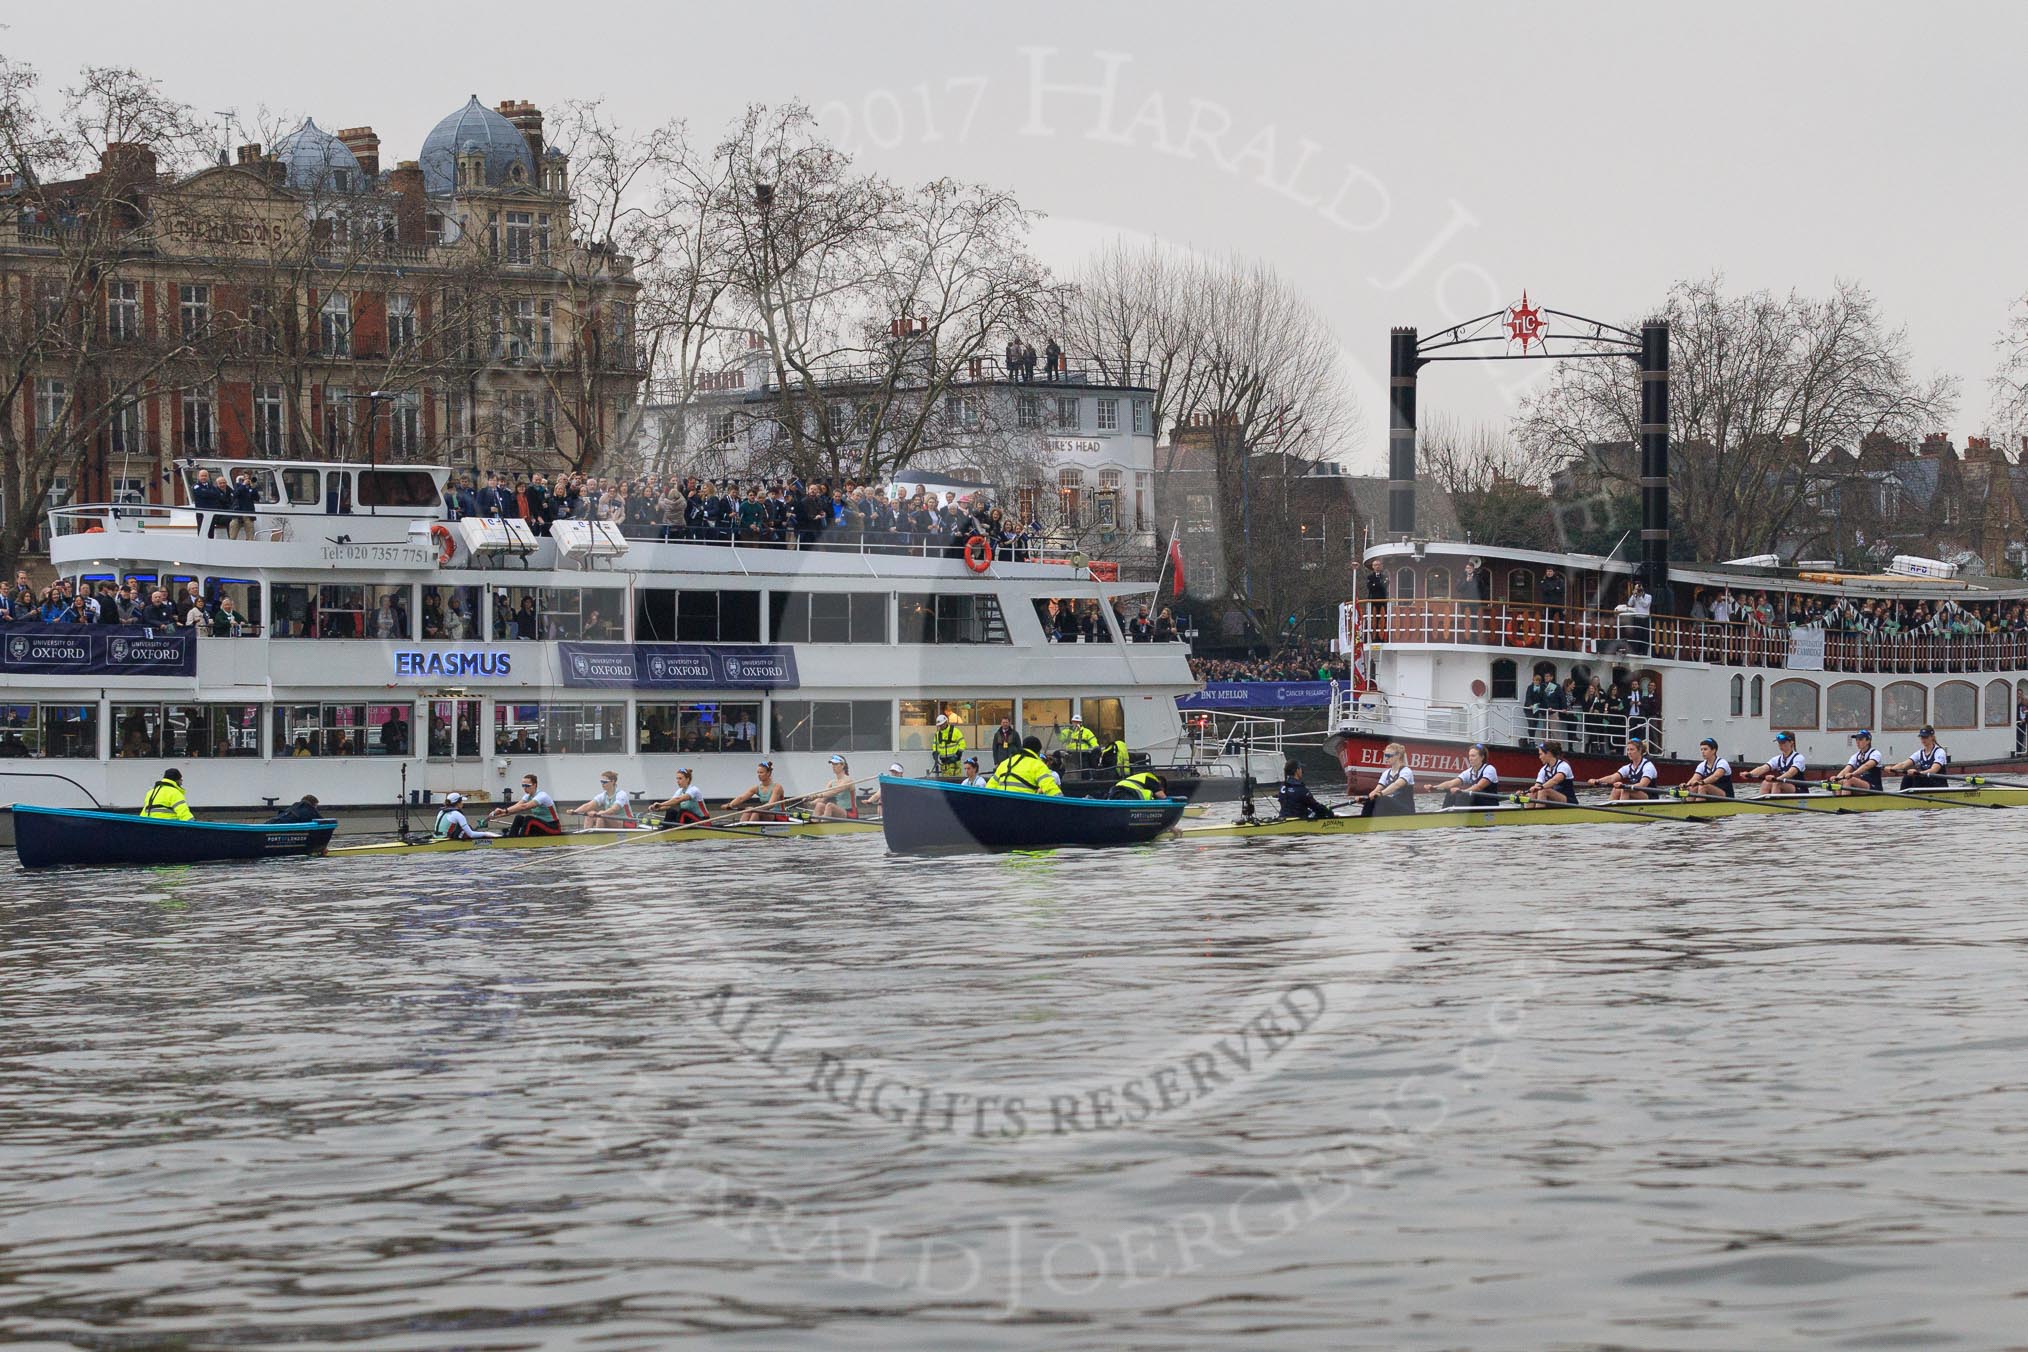 The Cancer Research UK Women's Boat Race 2018: The Oxford and Cambridge Blue Boats wit the stake boatsm ready for the start of the race.
River Thames between Putney Bridge and Mortlake,
London SW15,

United Kingdom,
on 24 March 2018 at 16:31, image #162